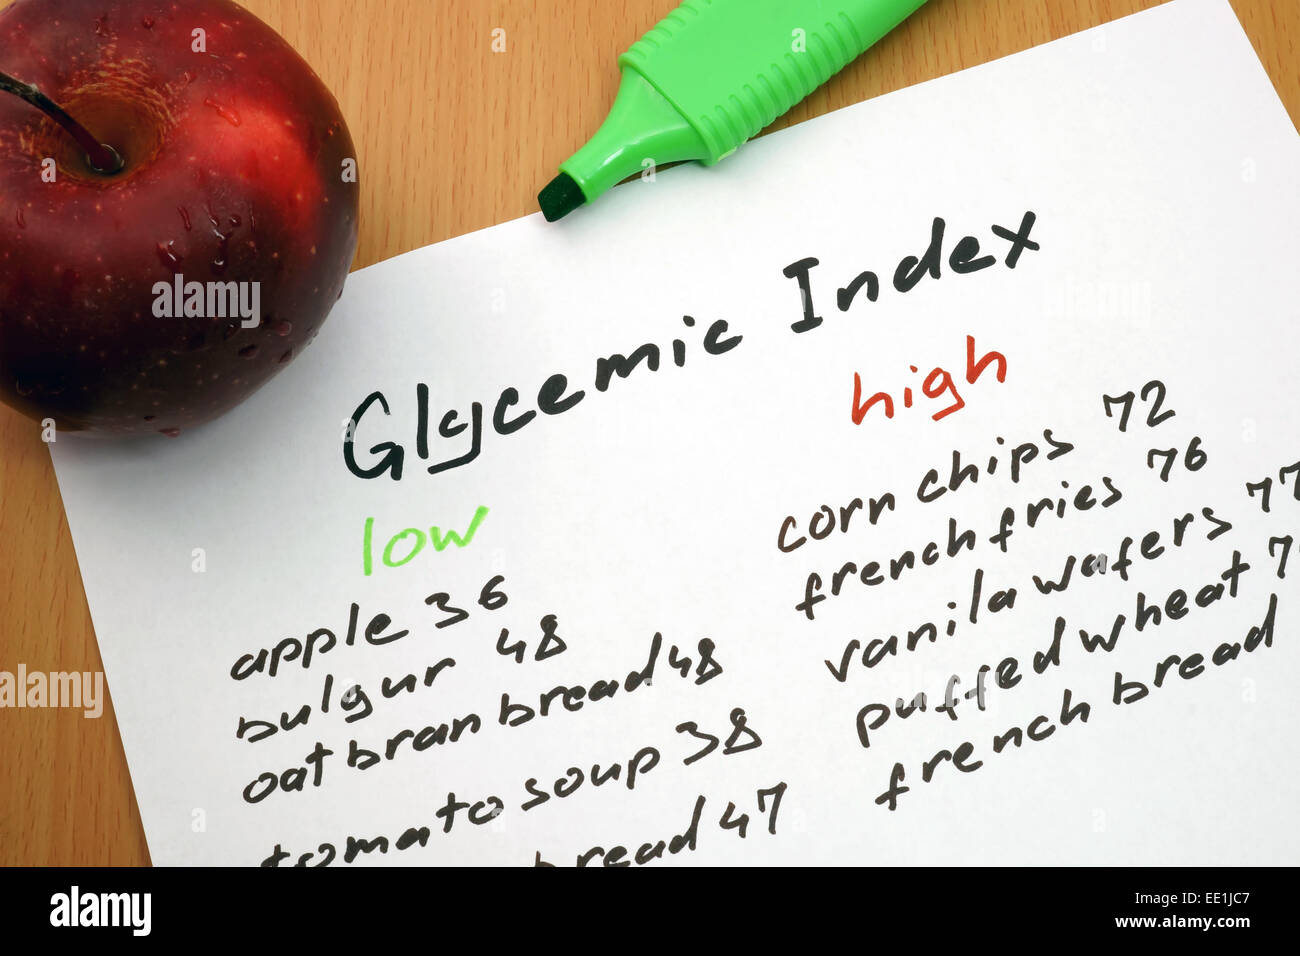 apple, a marker and a paper with a glycemic index Stock Photo